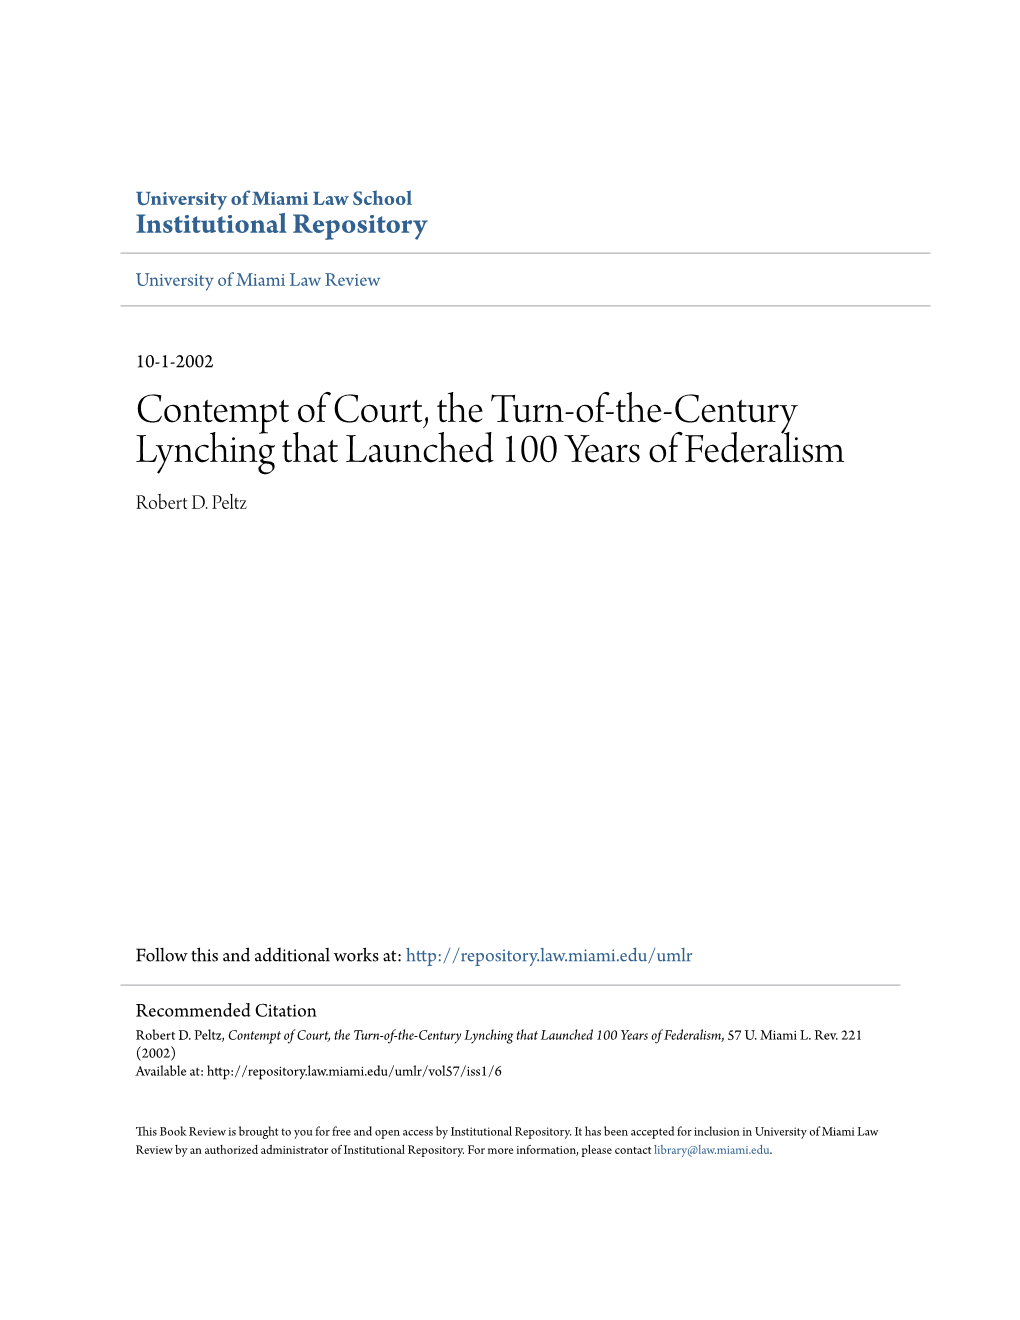 Contempt of Court, the Turn-Of-The-Century Lynching That Launched 100 Years of Federalism Robert D